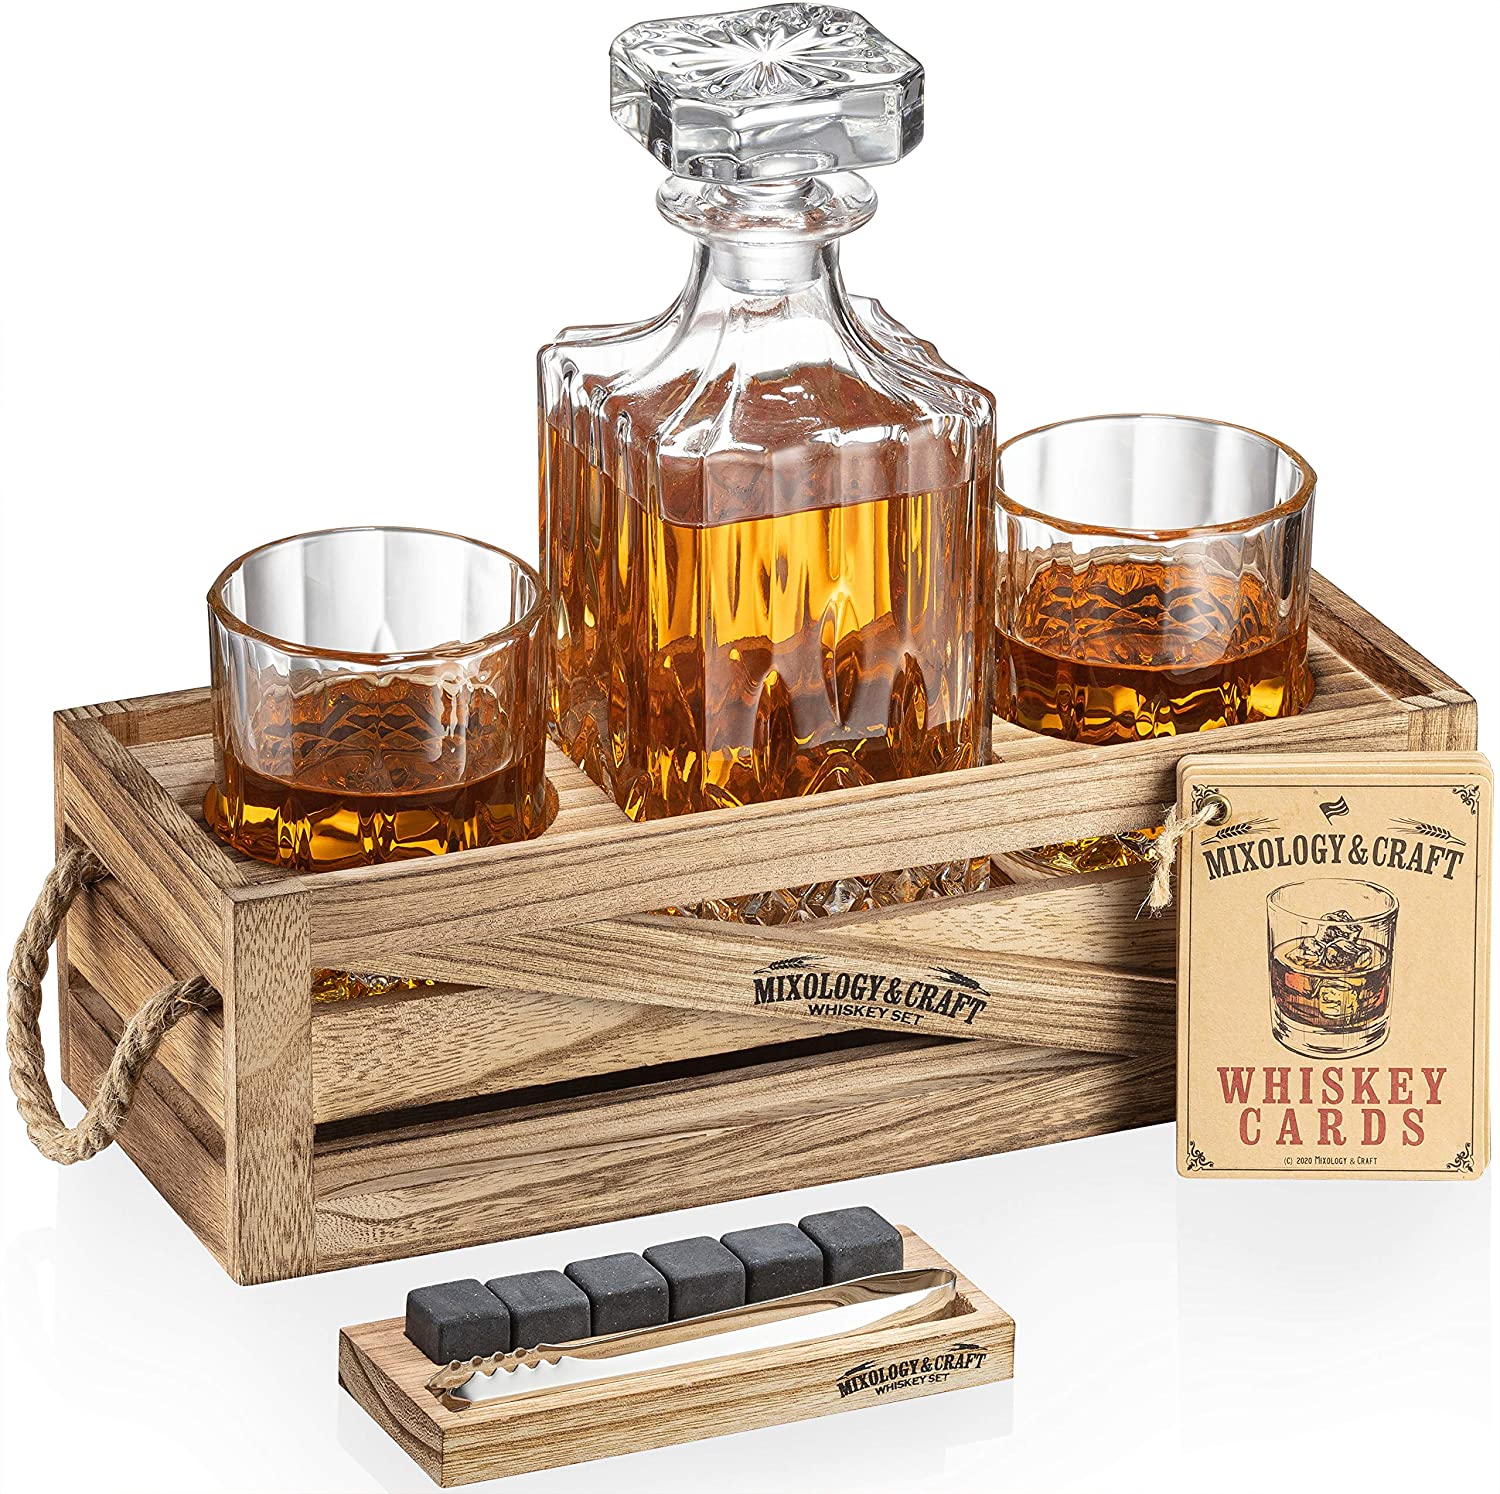  Luxurious Bar Gift Set - 2 Whiskey Glasses + 10 Bullets  Chilling Stainless-Steel Whiskey Rocks - Slate Stone Coasters & Tongs - Set  in Premium Wood Box by The Wine Savant 